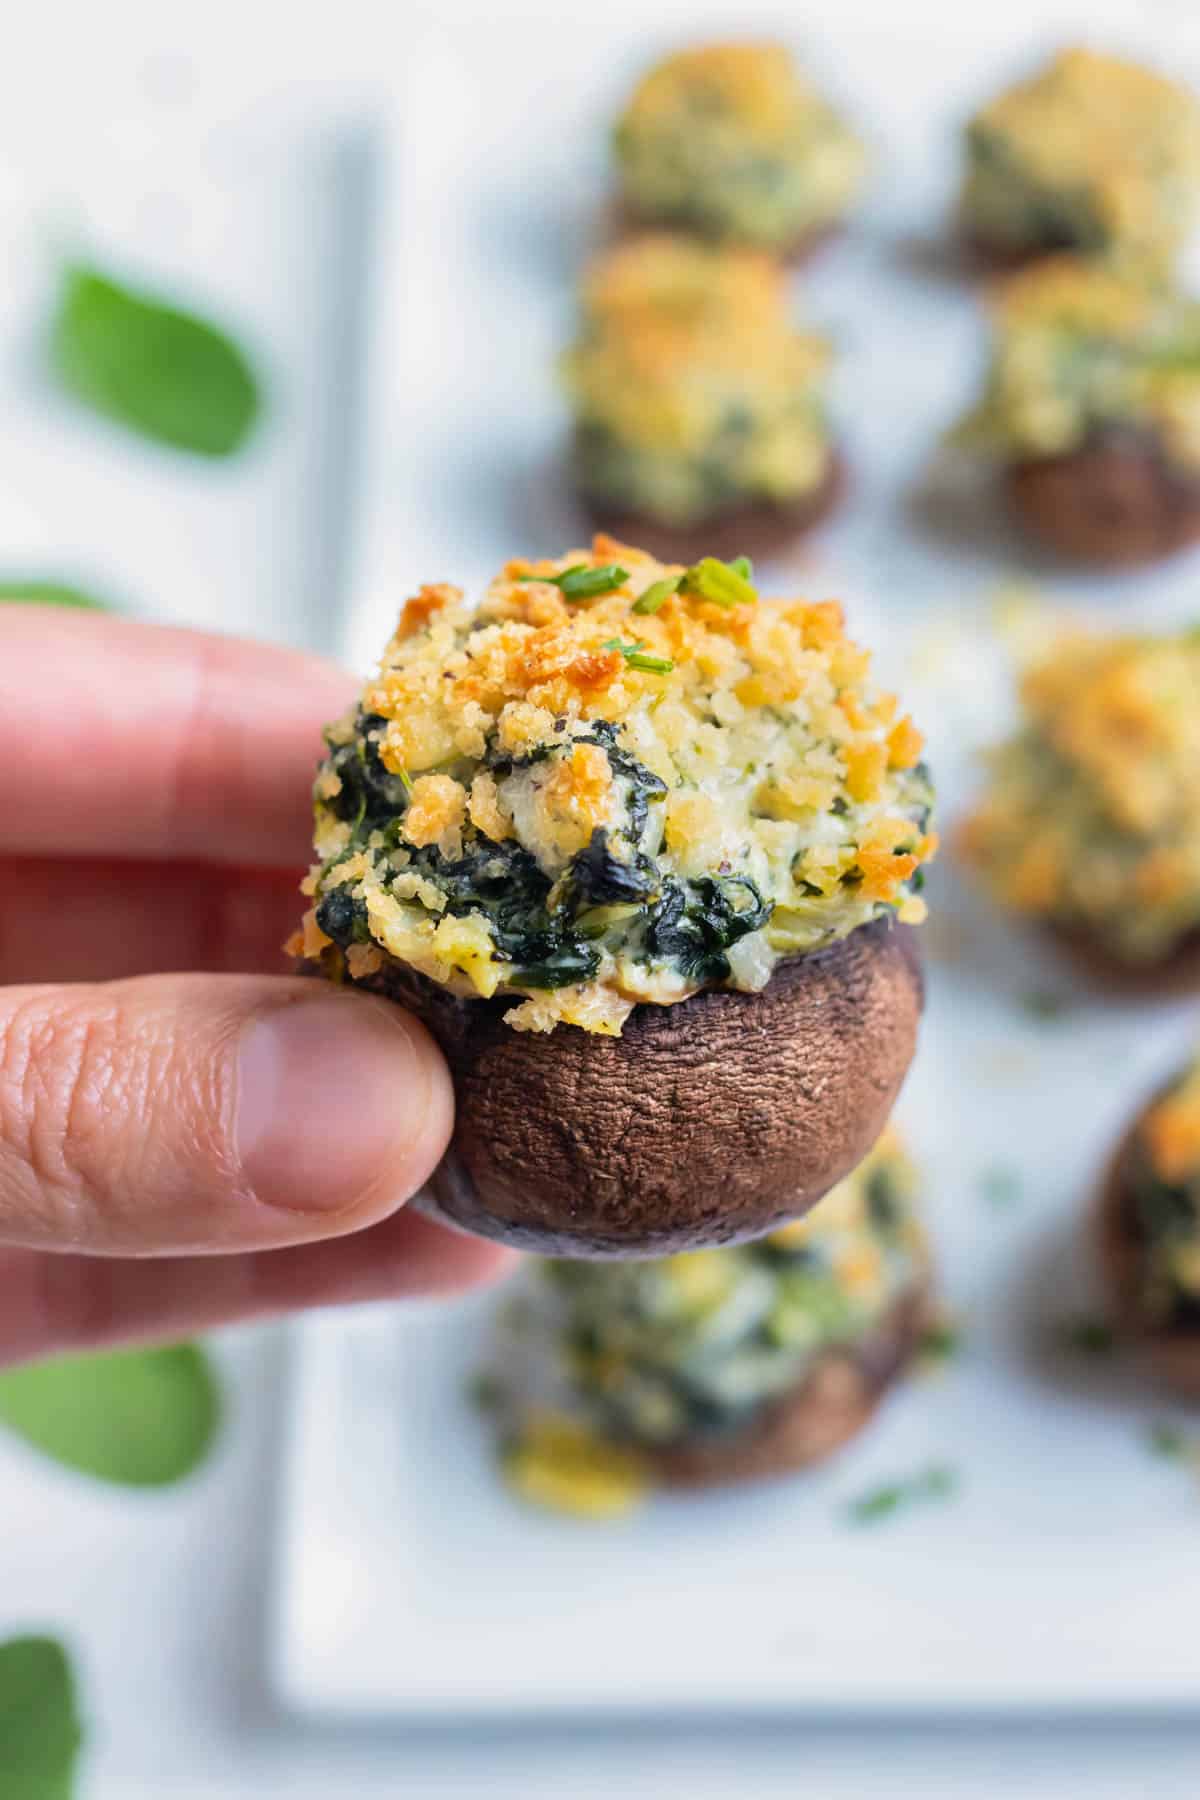 Spinach stuffed mushrooms are served with chives on a white platter.